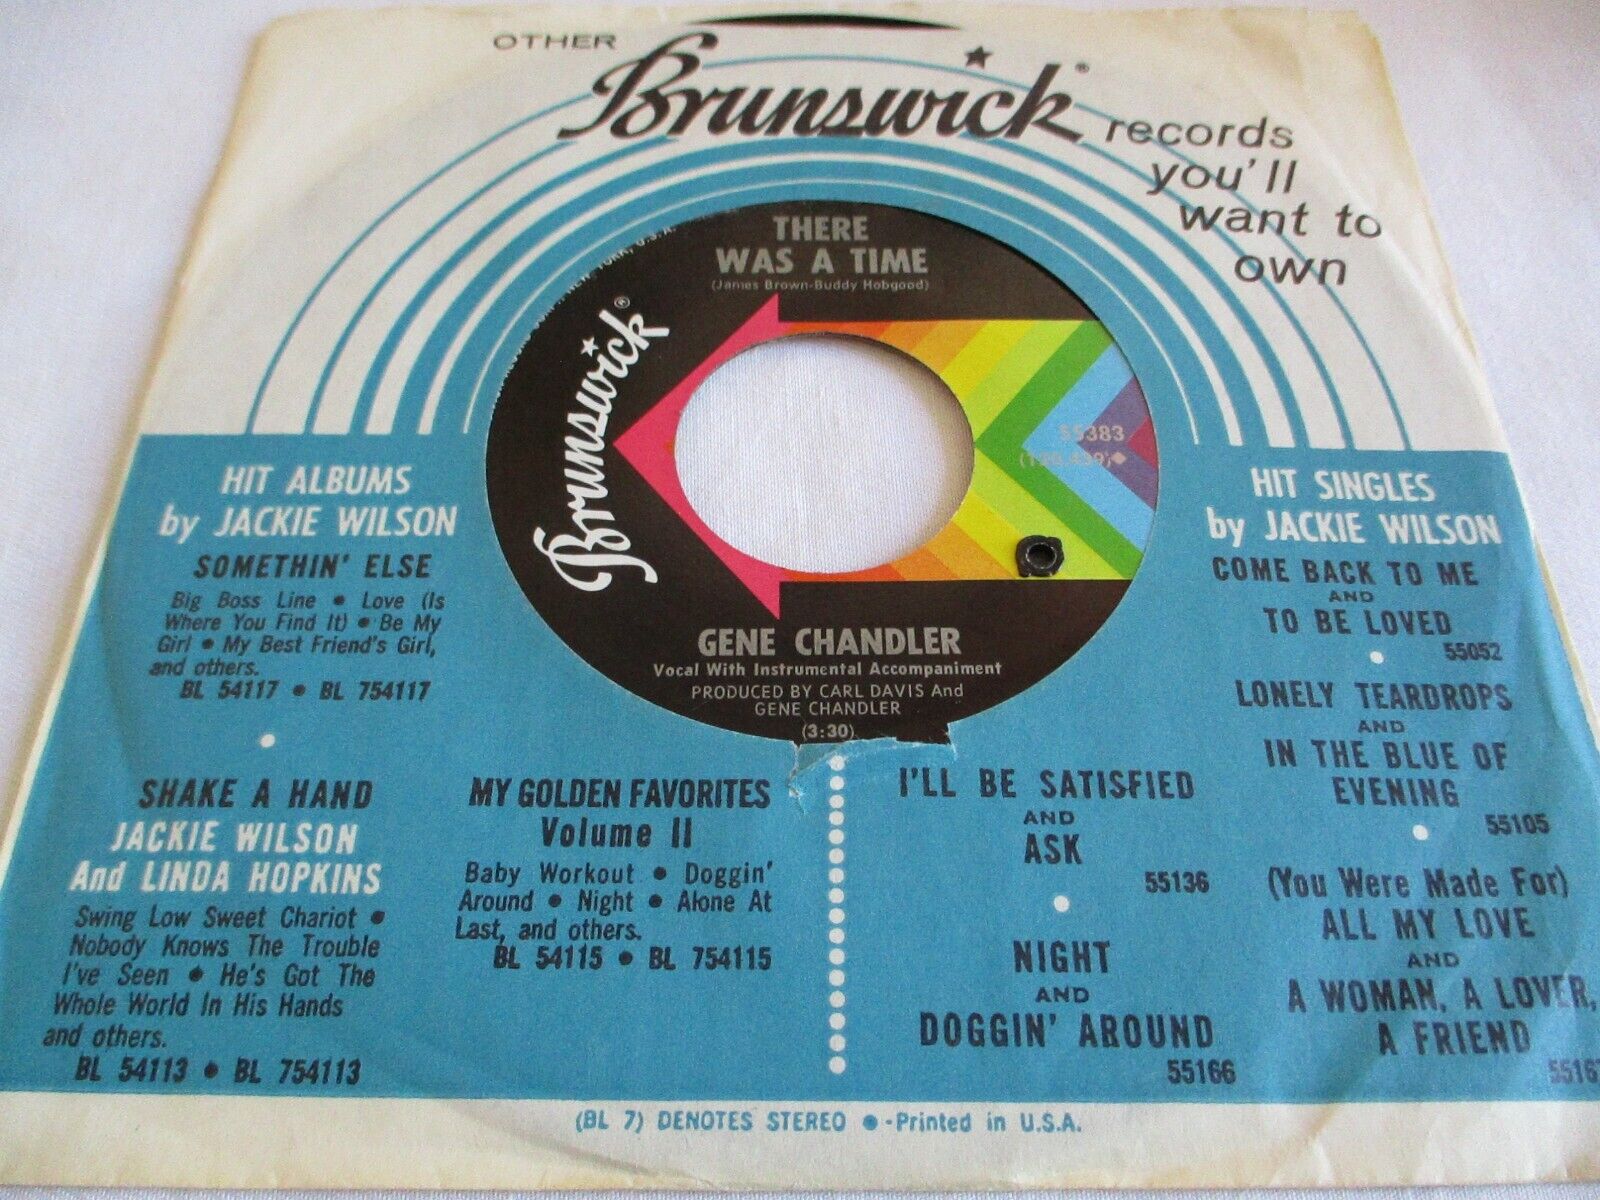 GENE CHANDLER - THERE WAS A TIME / THOSE WERE THE GOOD OLD DAYS - BRUNSWICK